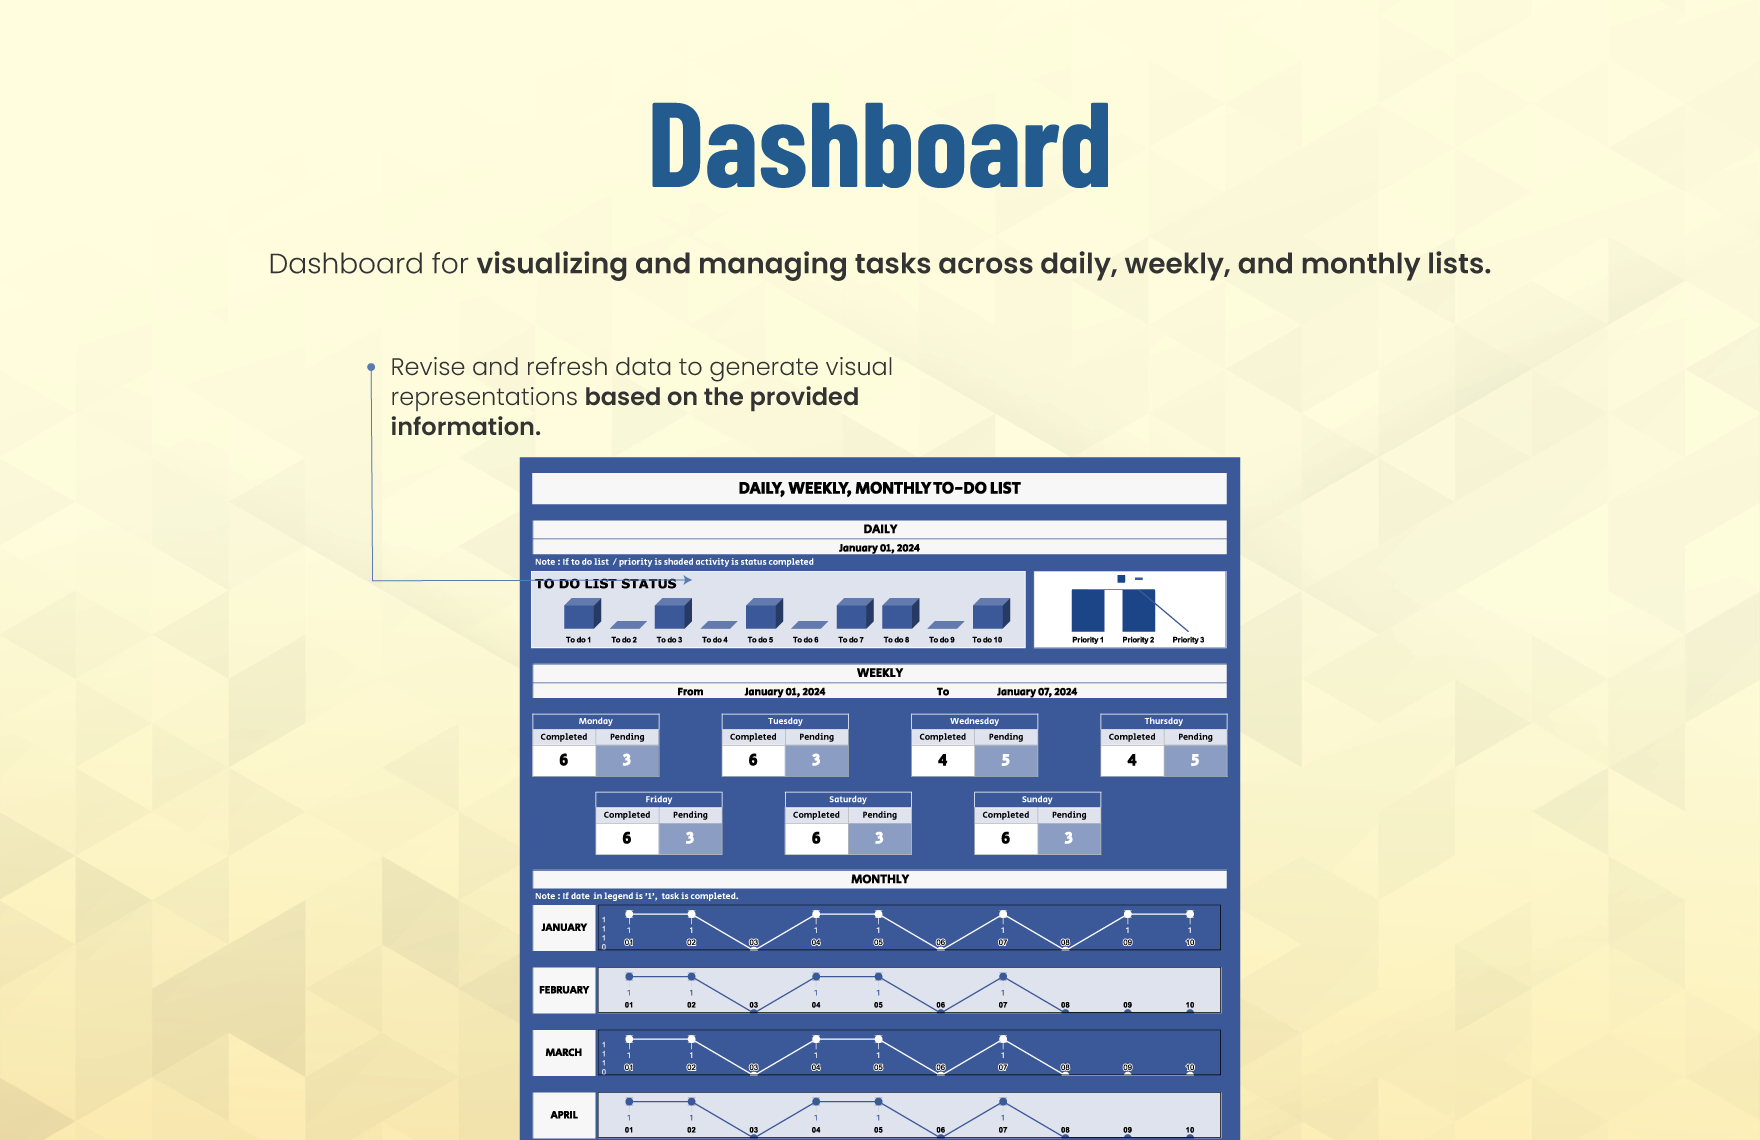 Daily Weekly Monthly To Do List Template